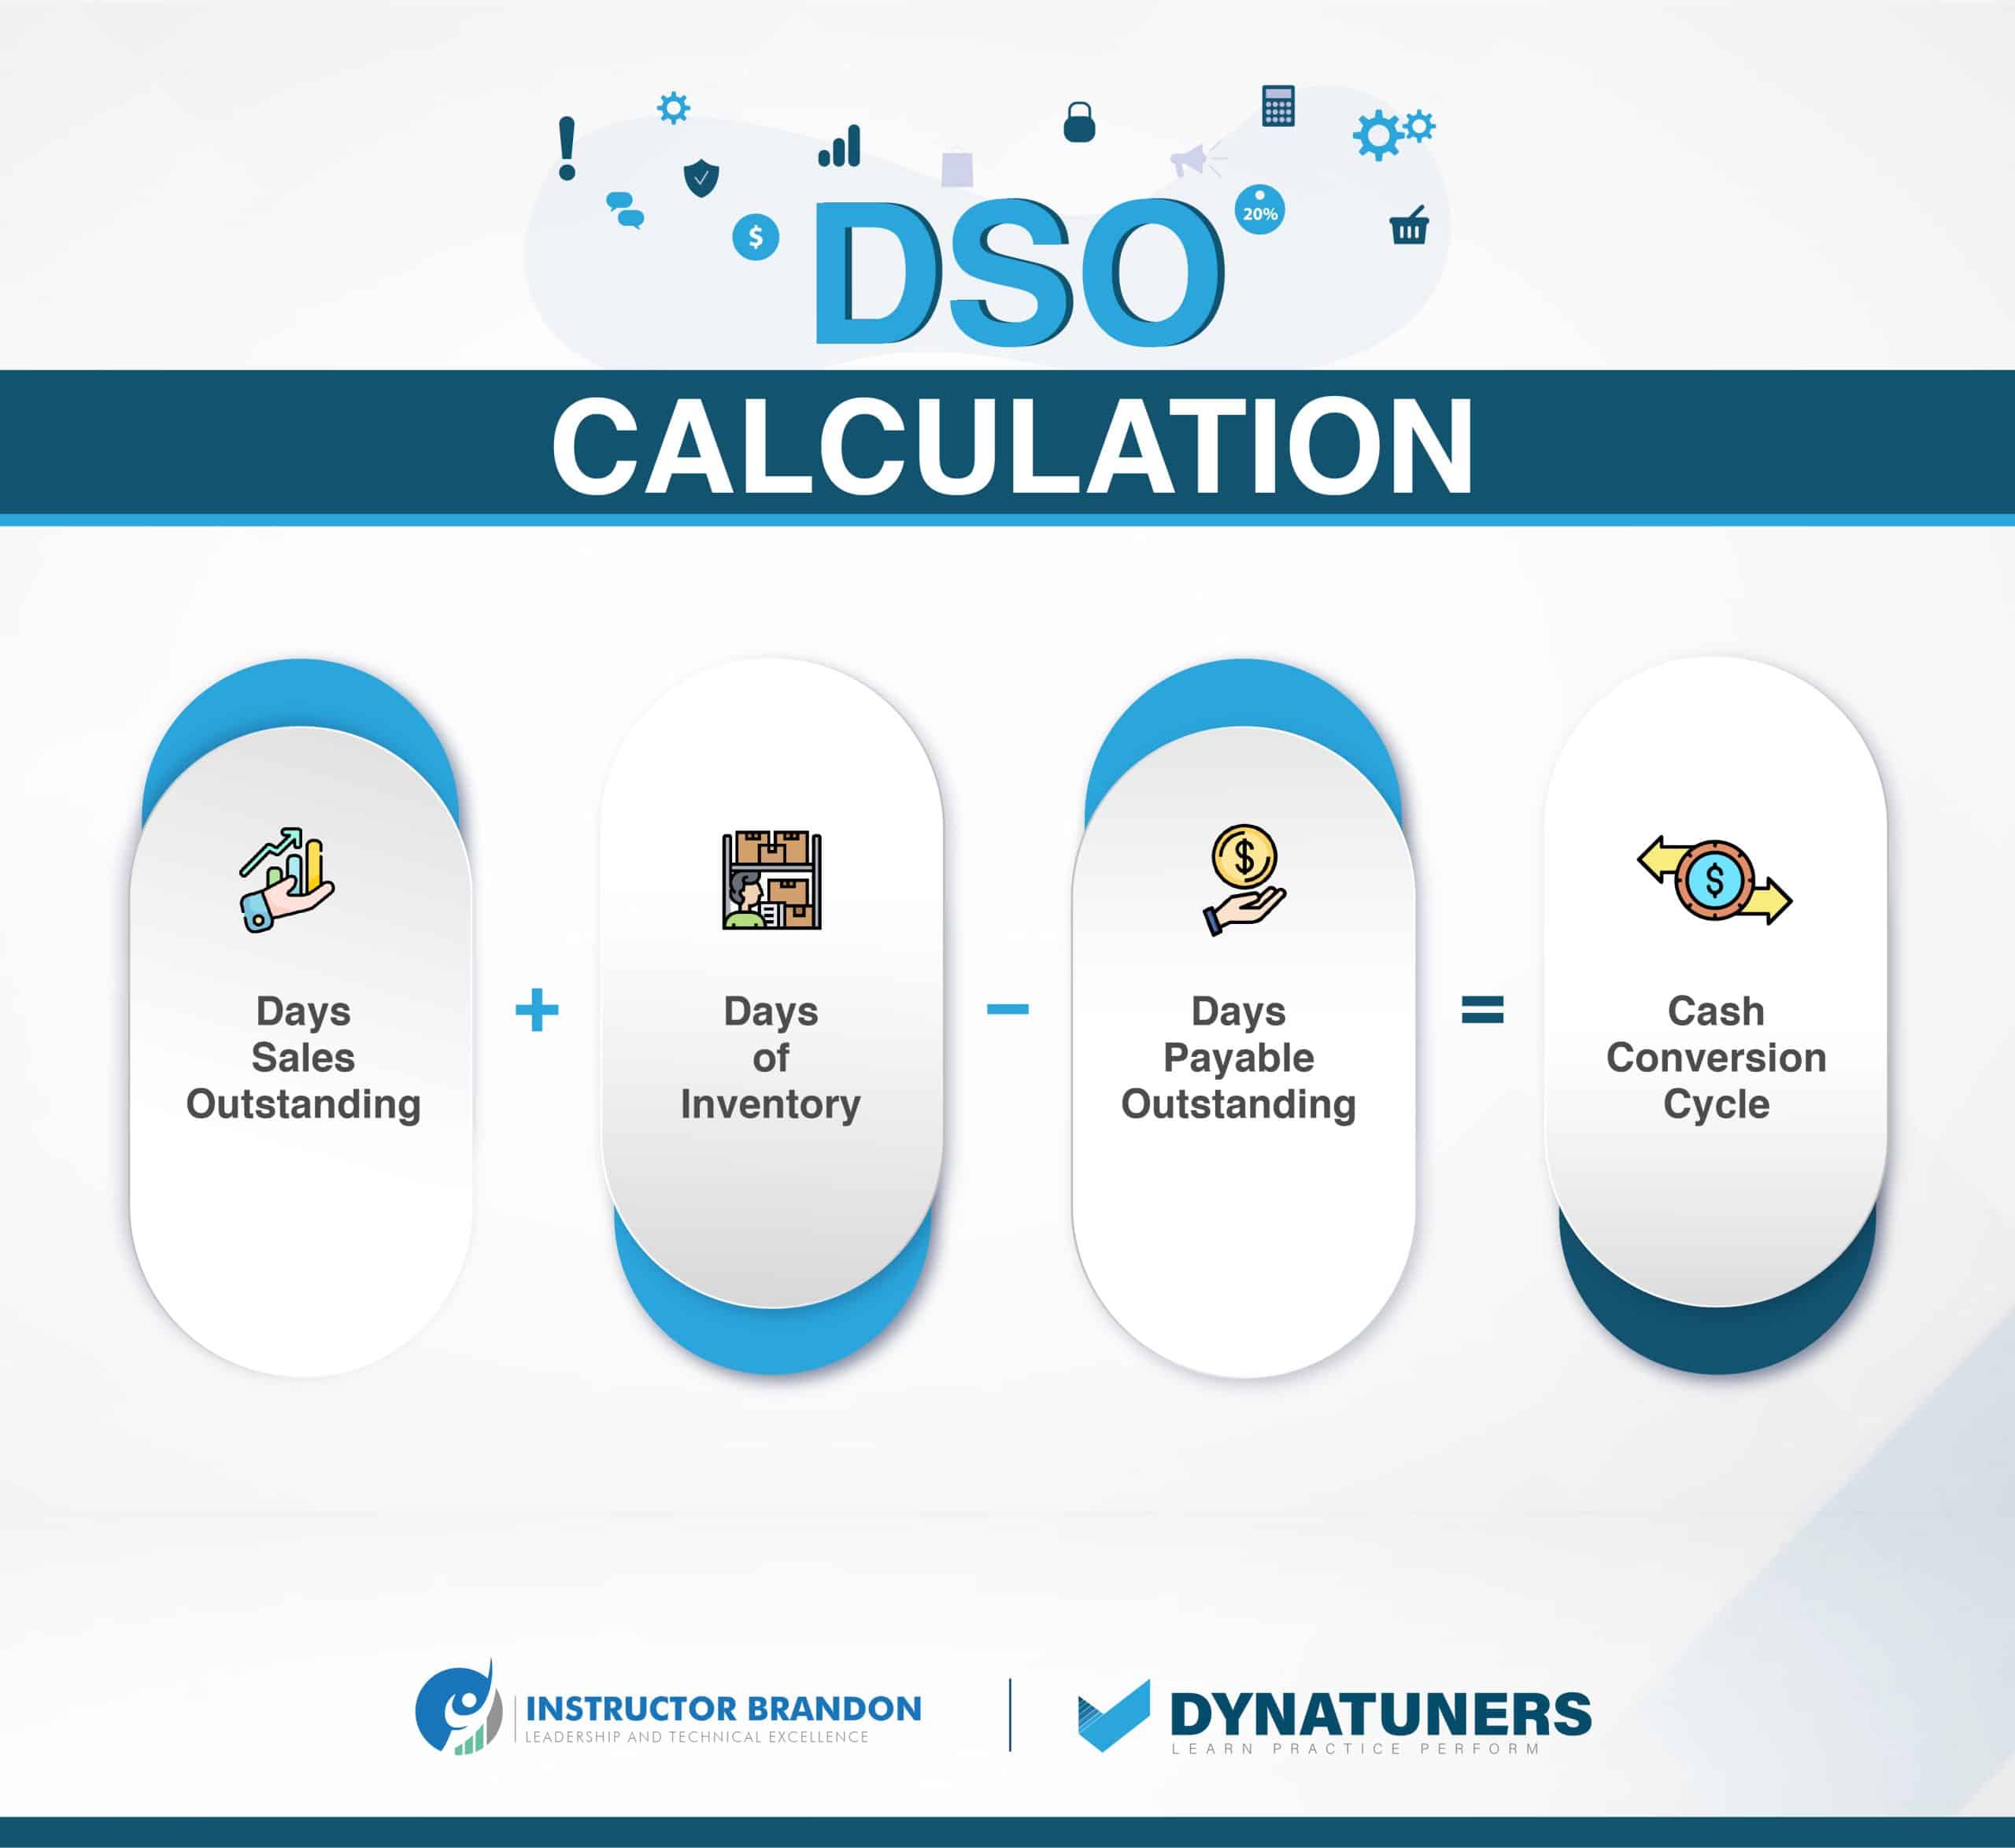 days sales outstanding (dso) calculation